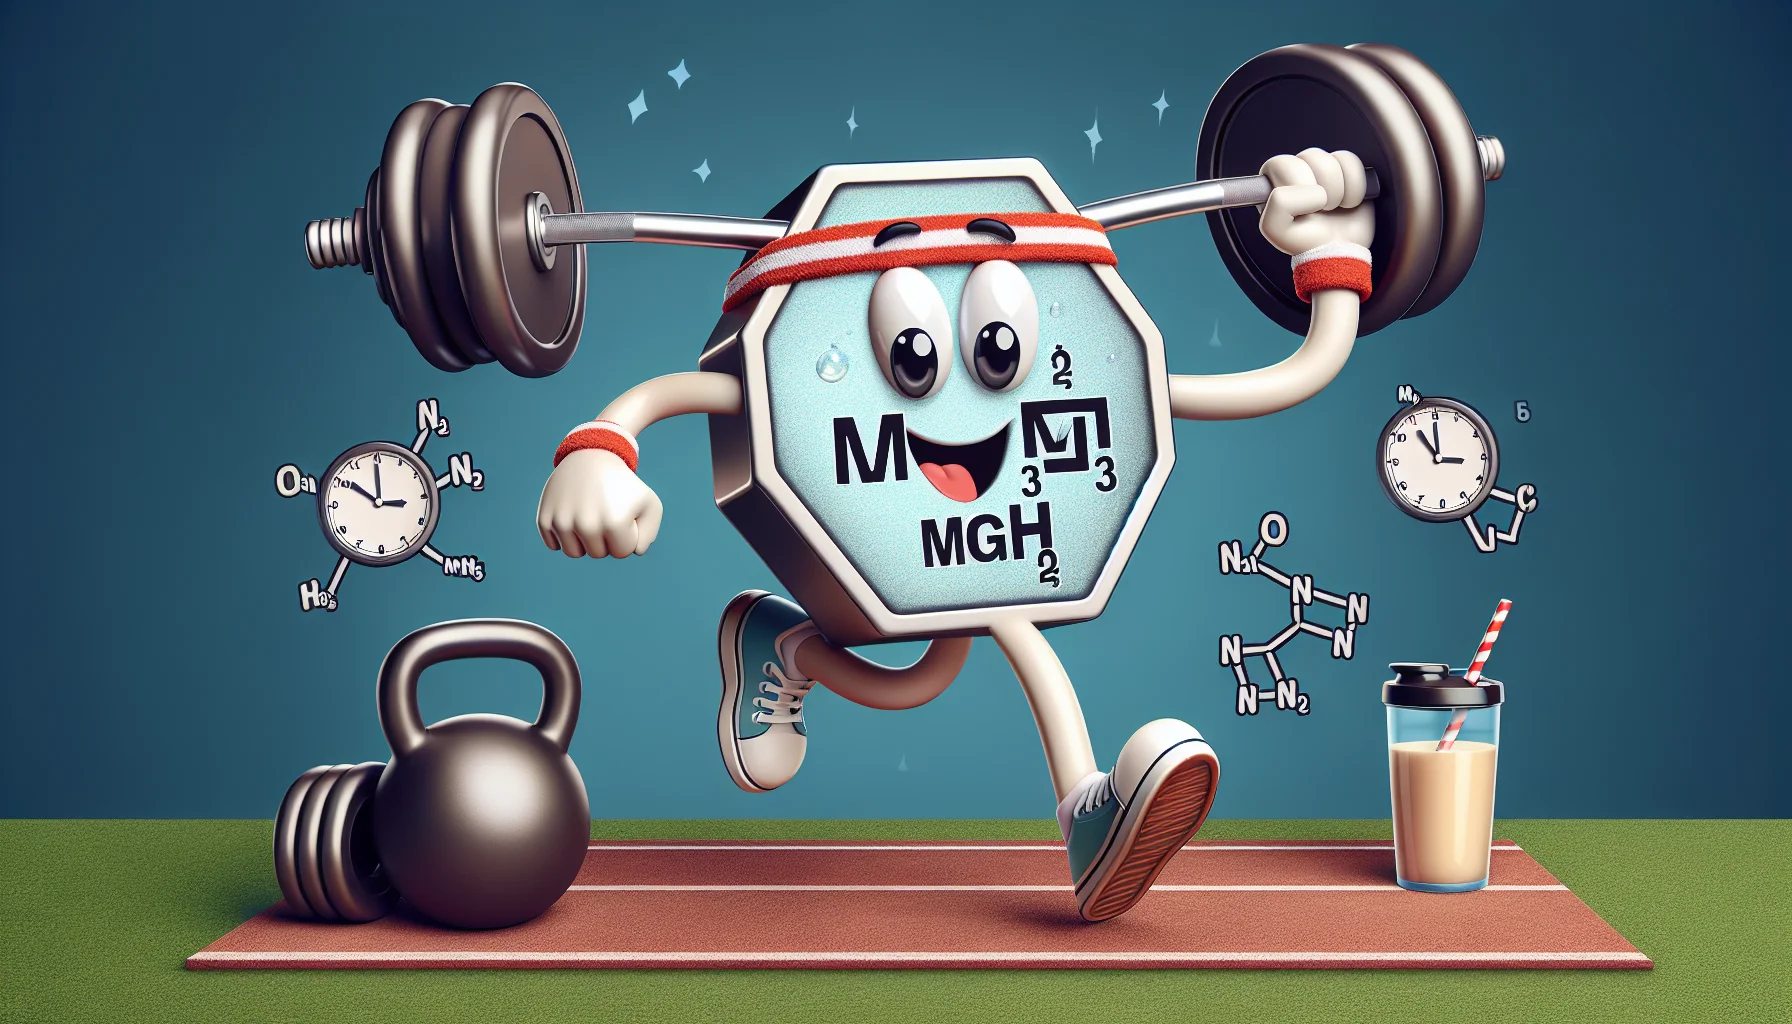 Picture an amusing scenario that encapsulates the appeal of sports supplements. The main element of this image should be the chemical formula for Magnesium Bromide (MgBr2), humorously personified. Perhaps it's wearing a sweatband, doing sit-ups, or sprinting laps around a track. This character is enthusiastically showing off its fitness realness, capturing the spirit of why people turn to supplements. Maybe there are other elements, such as dumbbells, protein shakes, or gears of a clock indicating consistent timing of supplement intake, incorporated to emphasize the value of sports supplements. Do note that this image requires a balance between humor, realism, and clear emphasis on Magnesium Bromide.